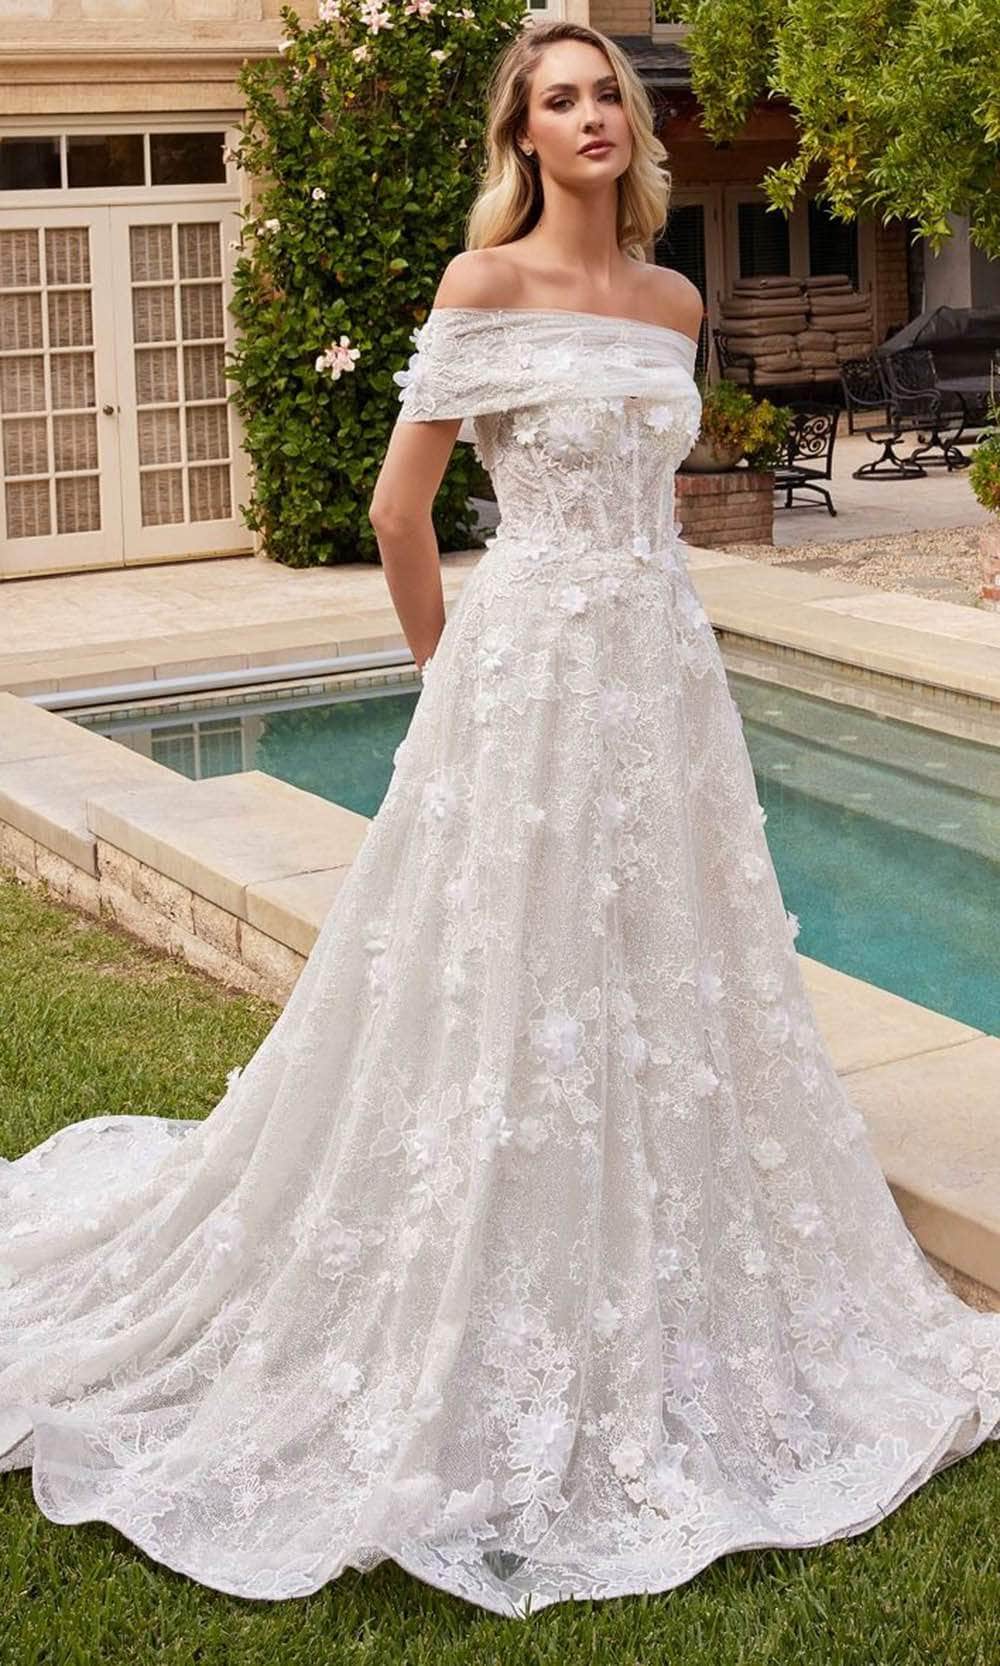 Custom Made Colorful Flower Corset Ballgown Wedding Dress With Lace Applique,  Tulle, And Covered Laces Up Back From Sexypromdress, $313.57 | DHgate.Com